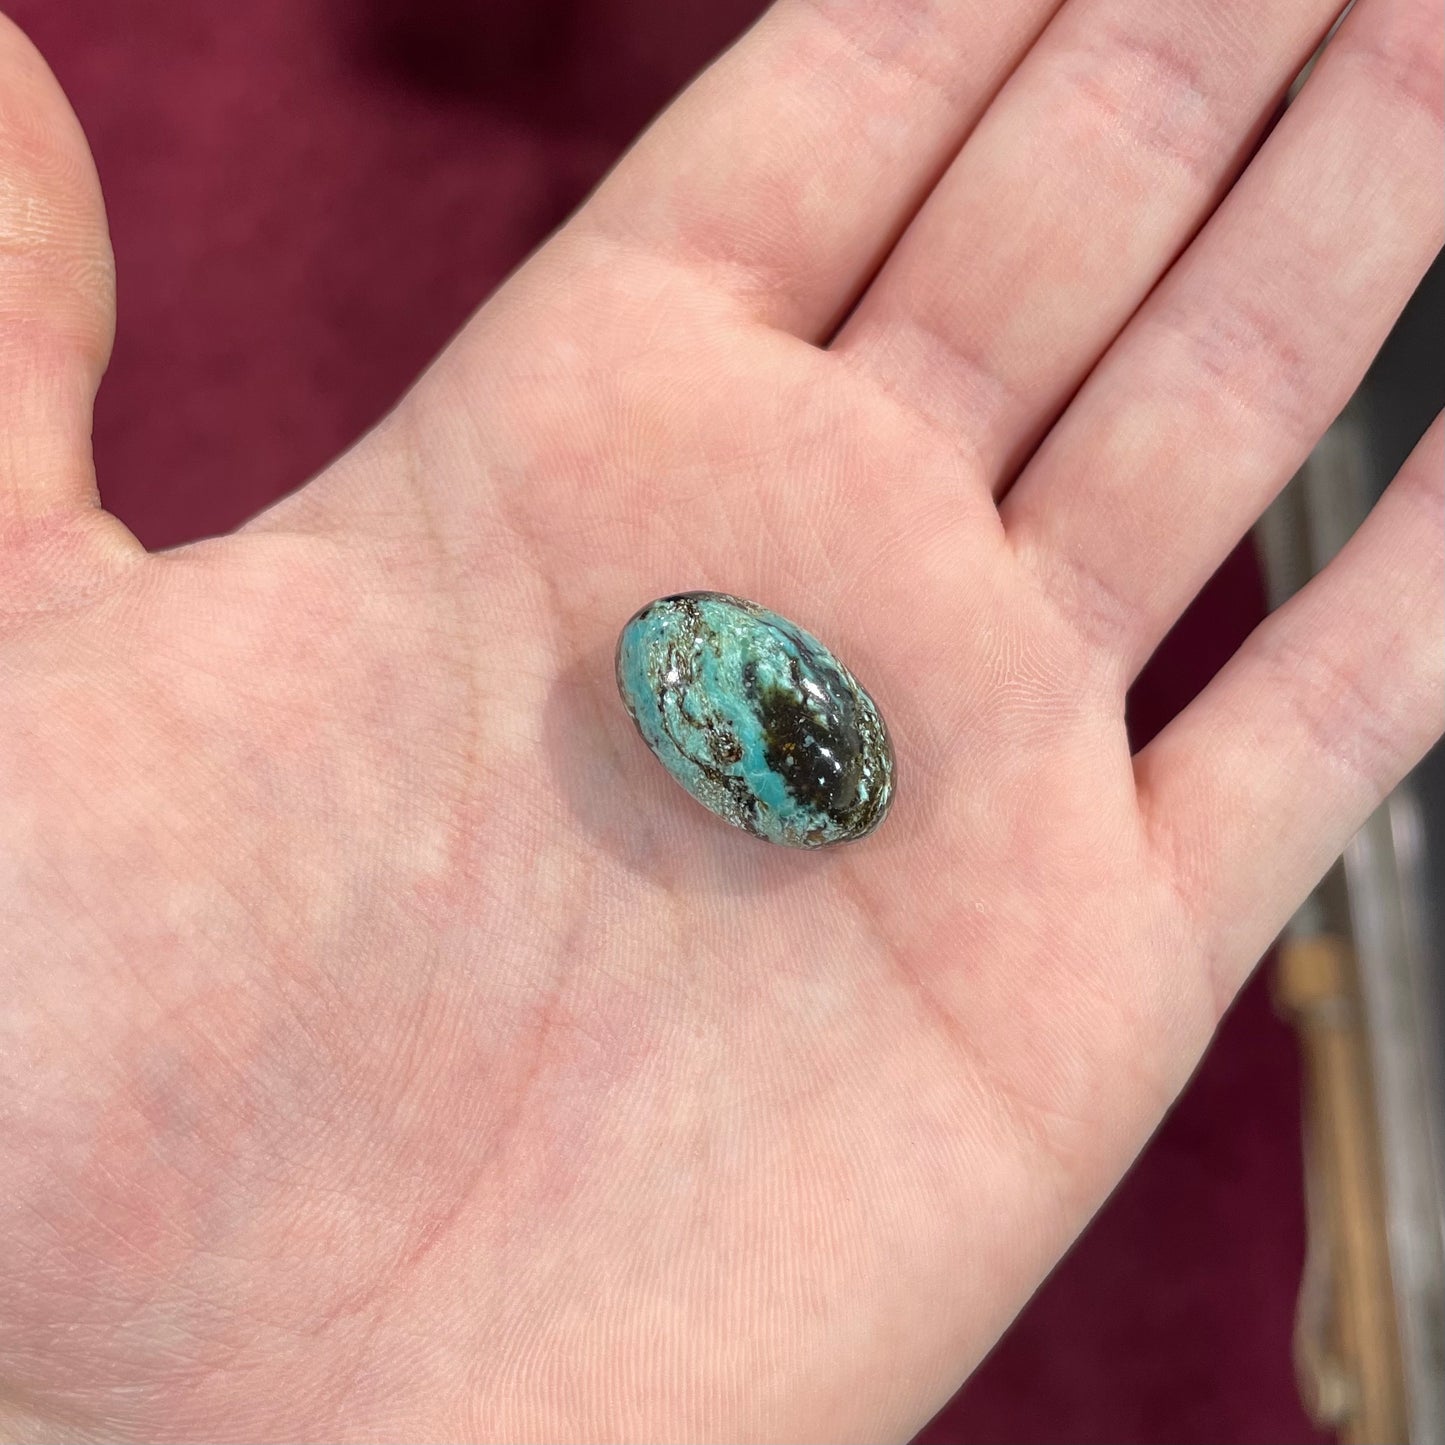 A loose, oval cabochon cut Royston turquoise stone from Nevada.